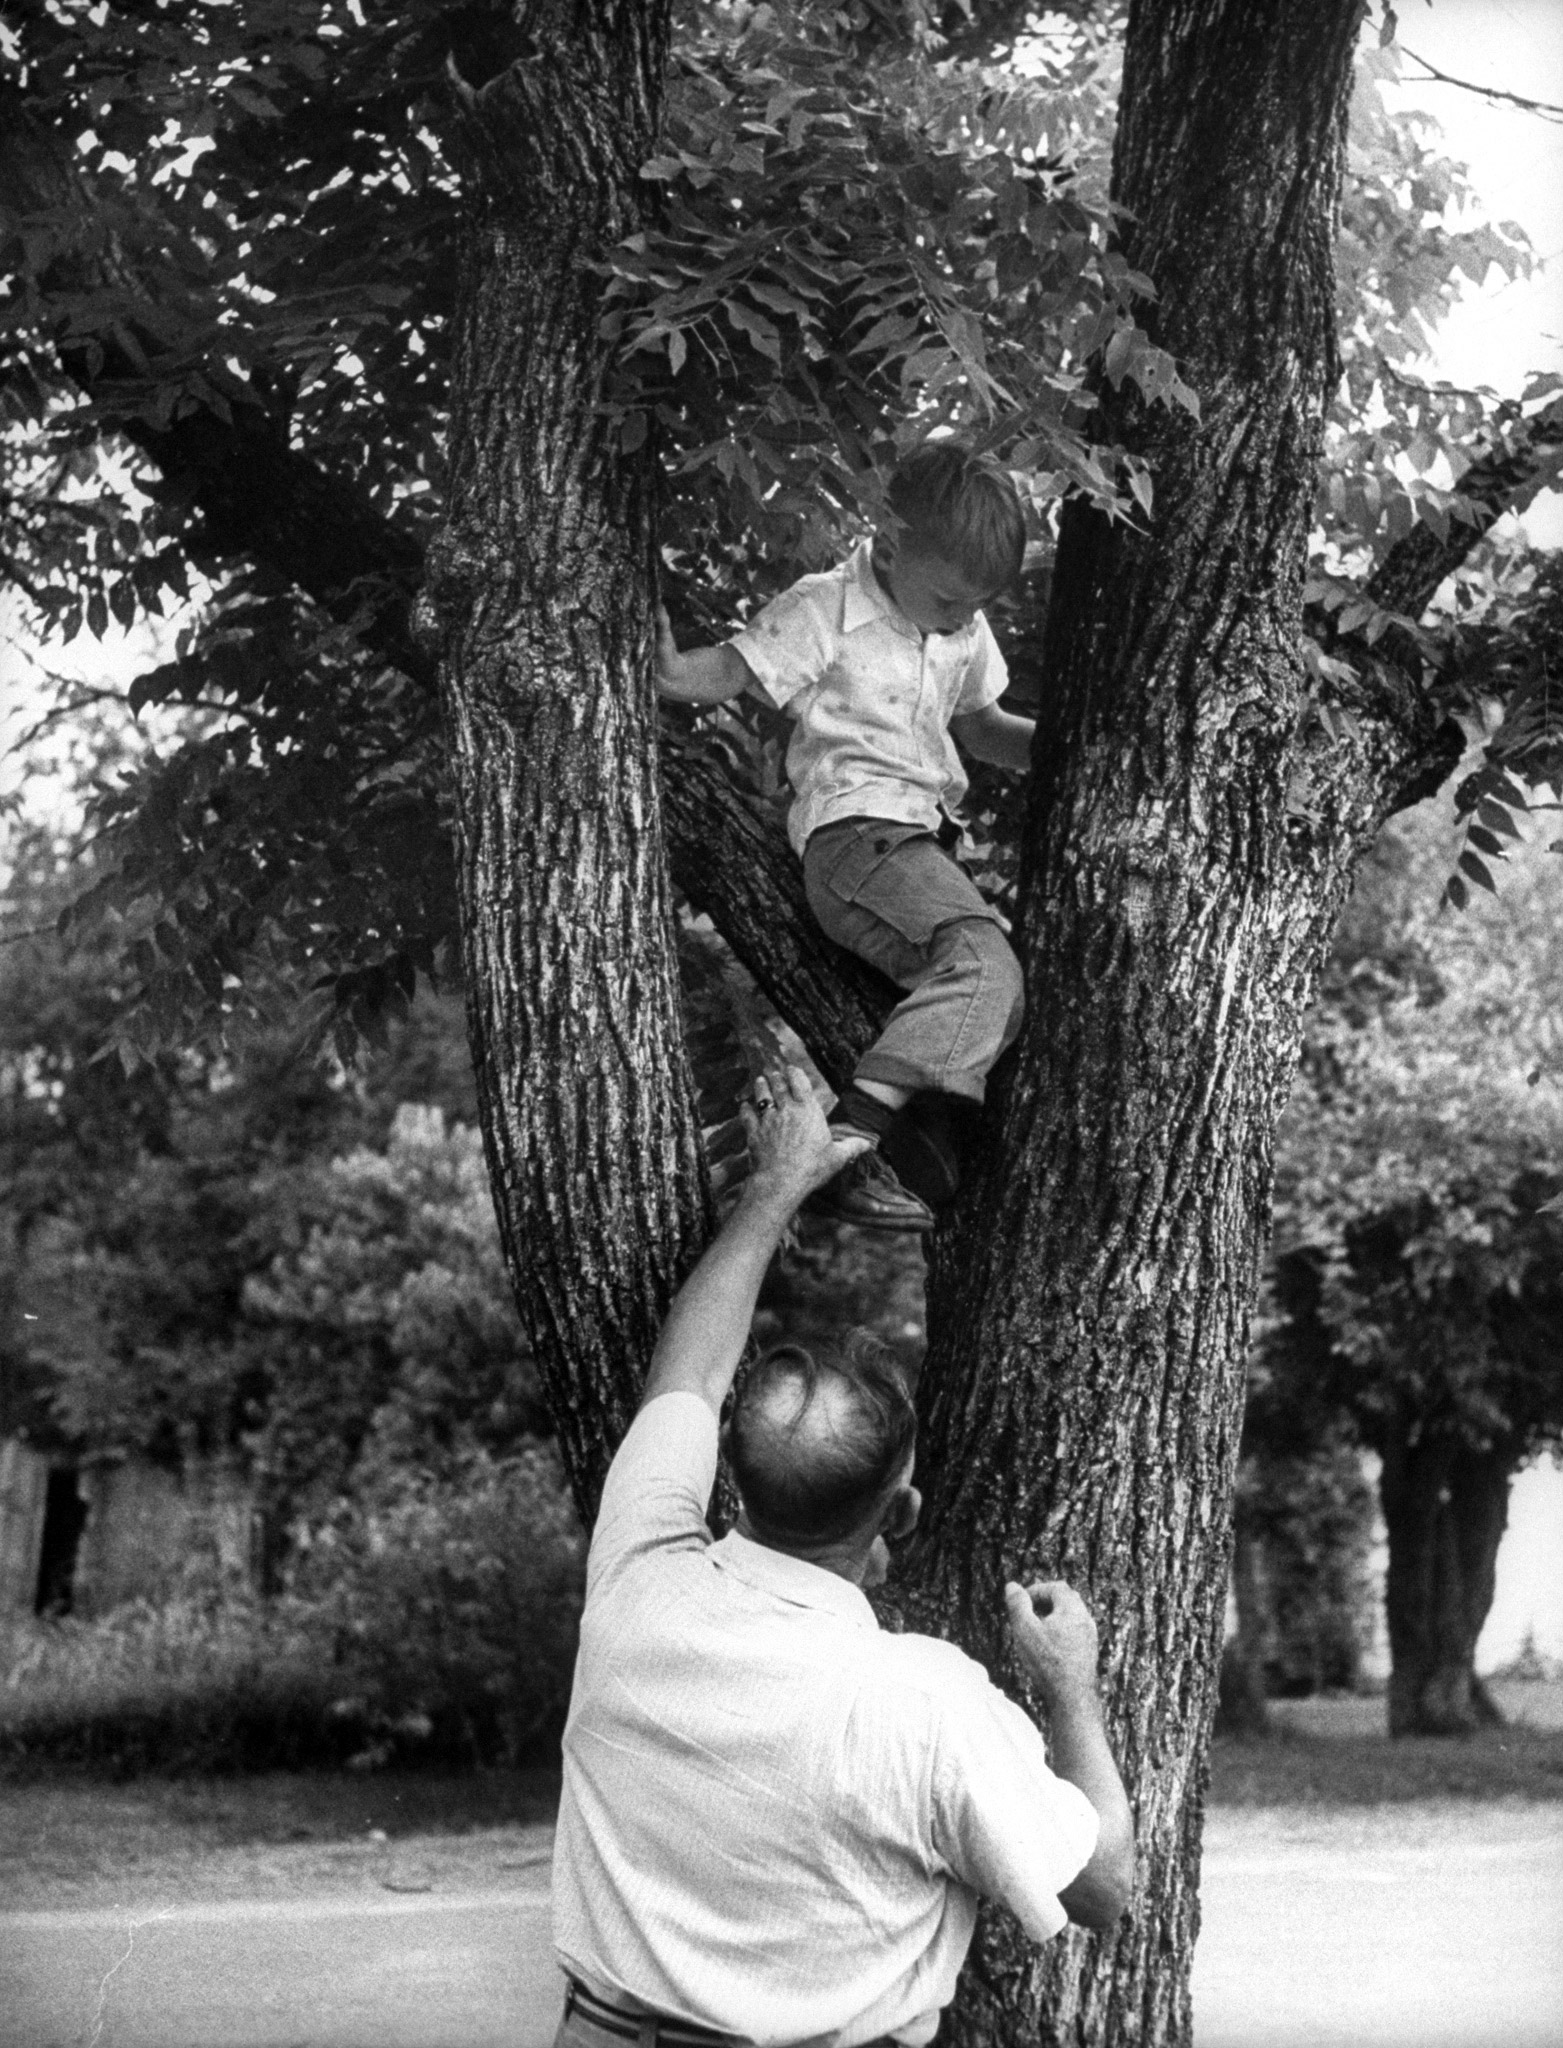 Billy Conner and his grandfather William climbing a tree.